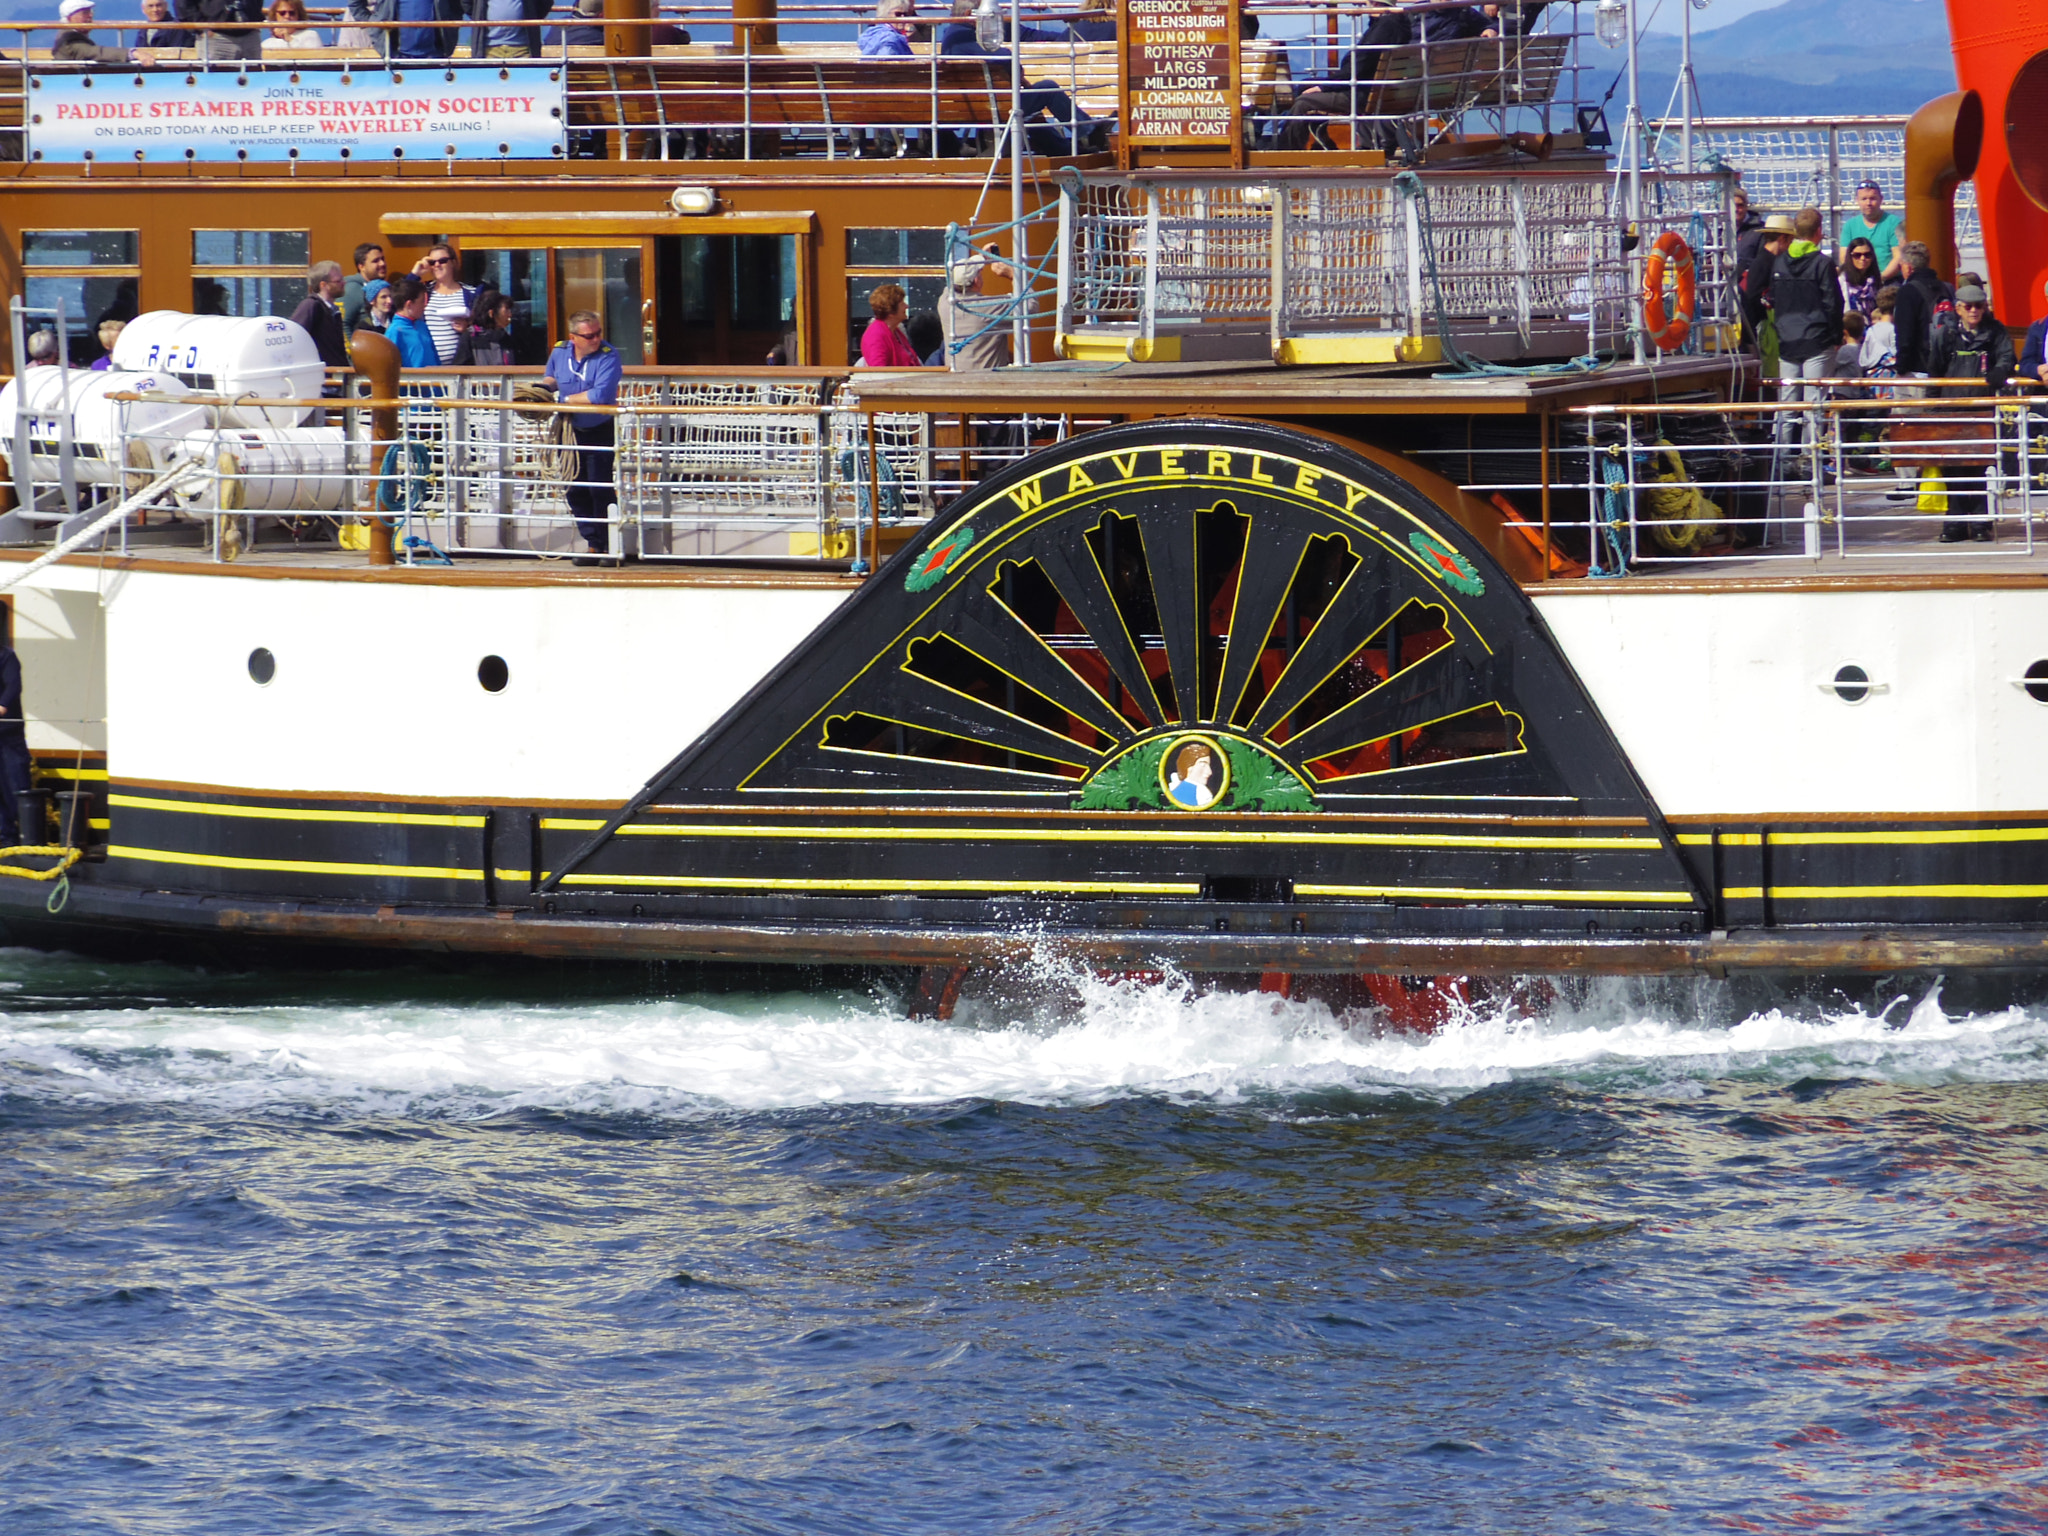 Pentax Q sample photo. Waverley. the last ocean going paddle steamer. photography